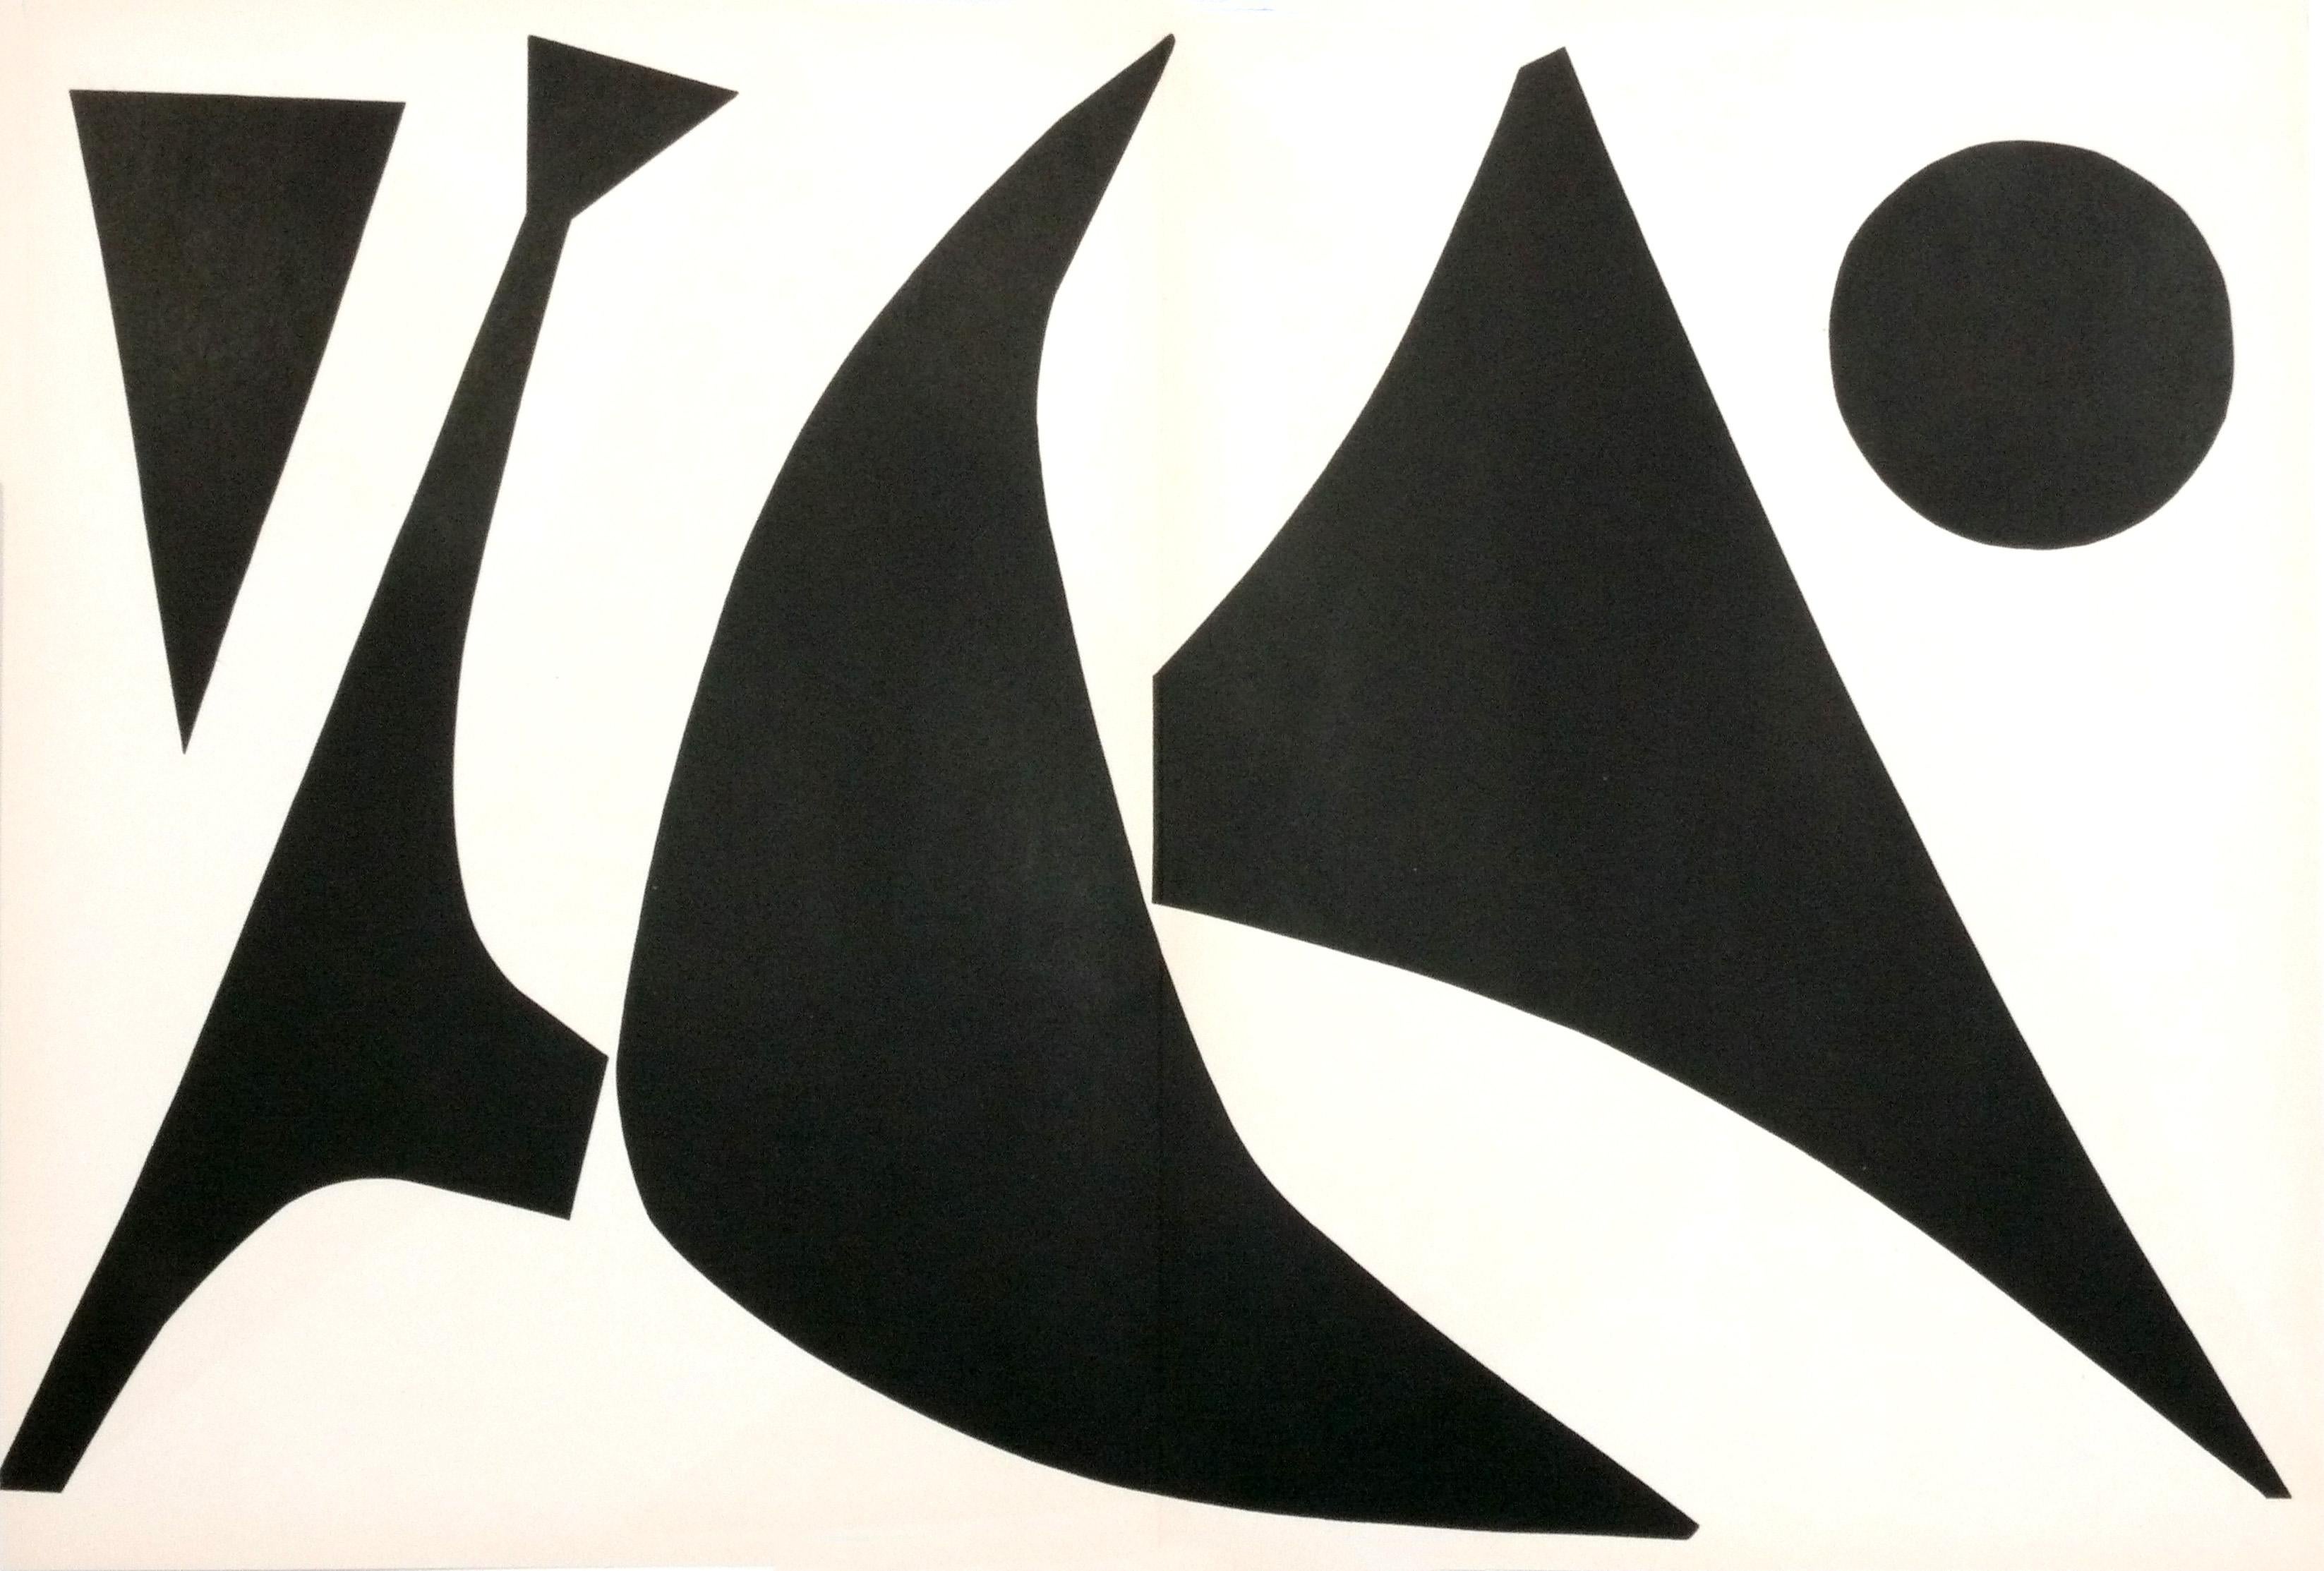 Selection of Alexander Calder color lithographs, French, circa 1960s. They are from the limited edition folio “Derriere le Miroir”, published by the legendary Galerie Maeght, circa 1960s. Please see our other 1stdibs listings for more Alexander